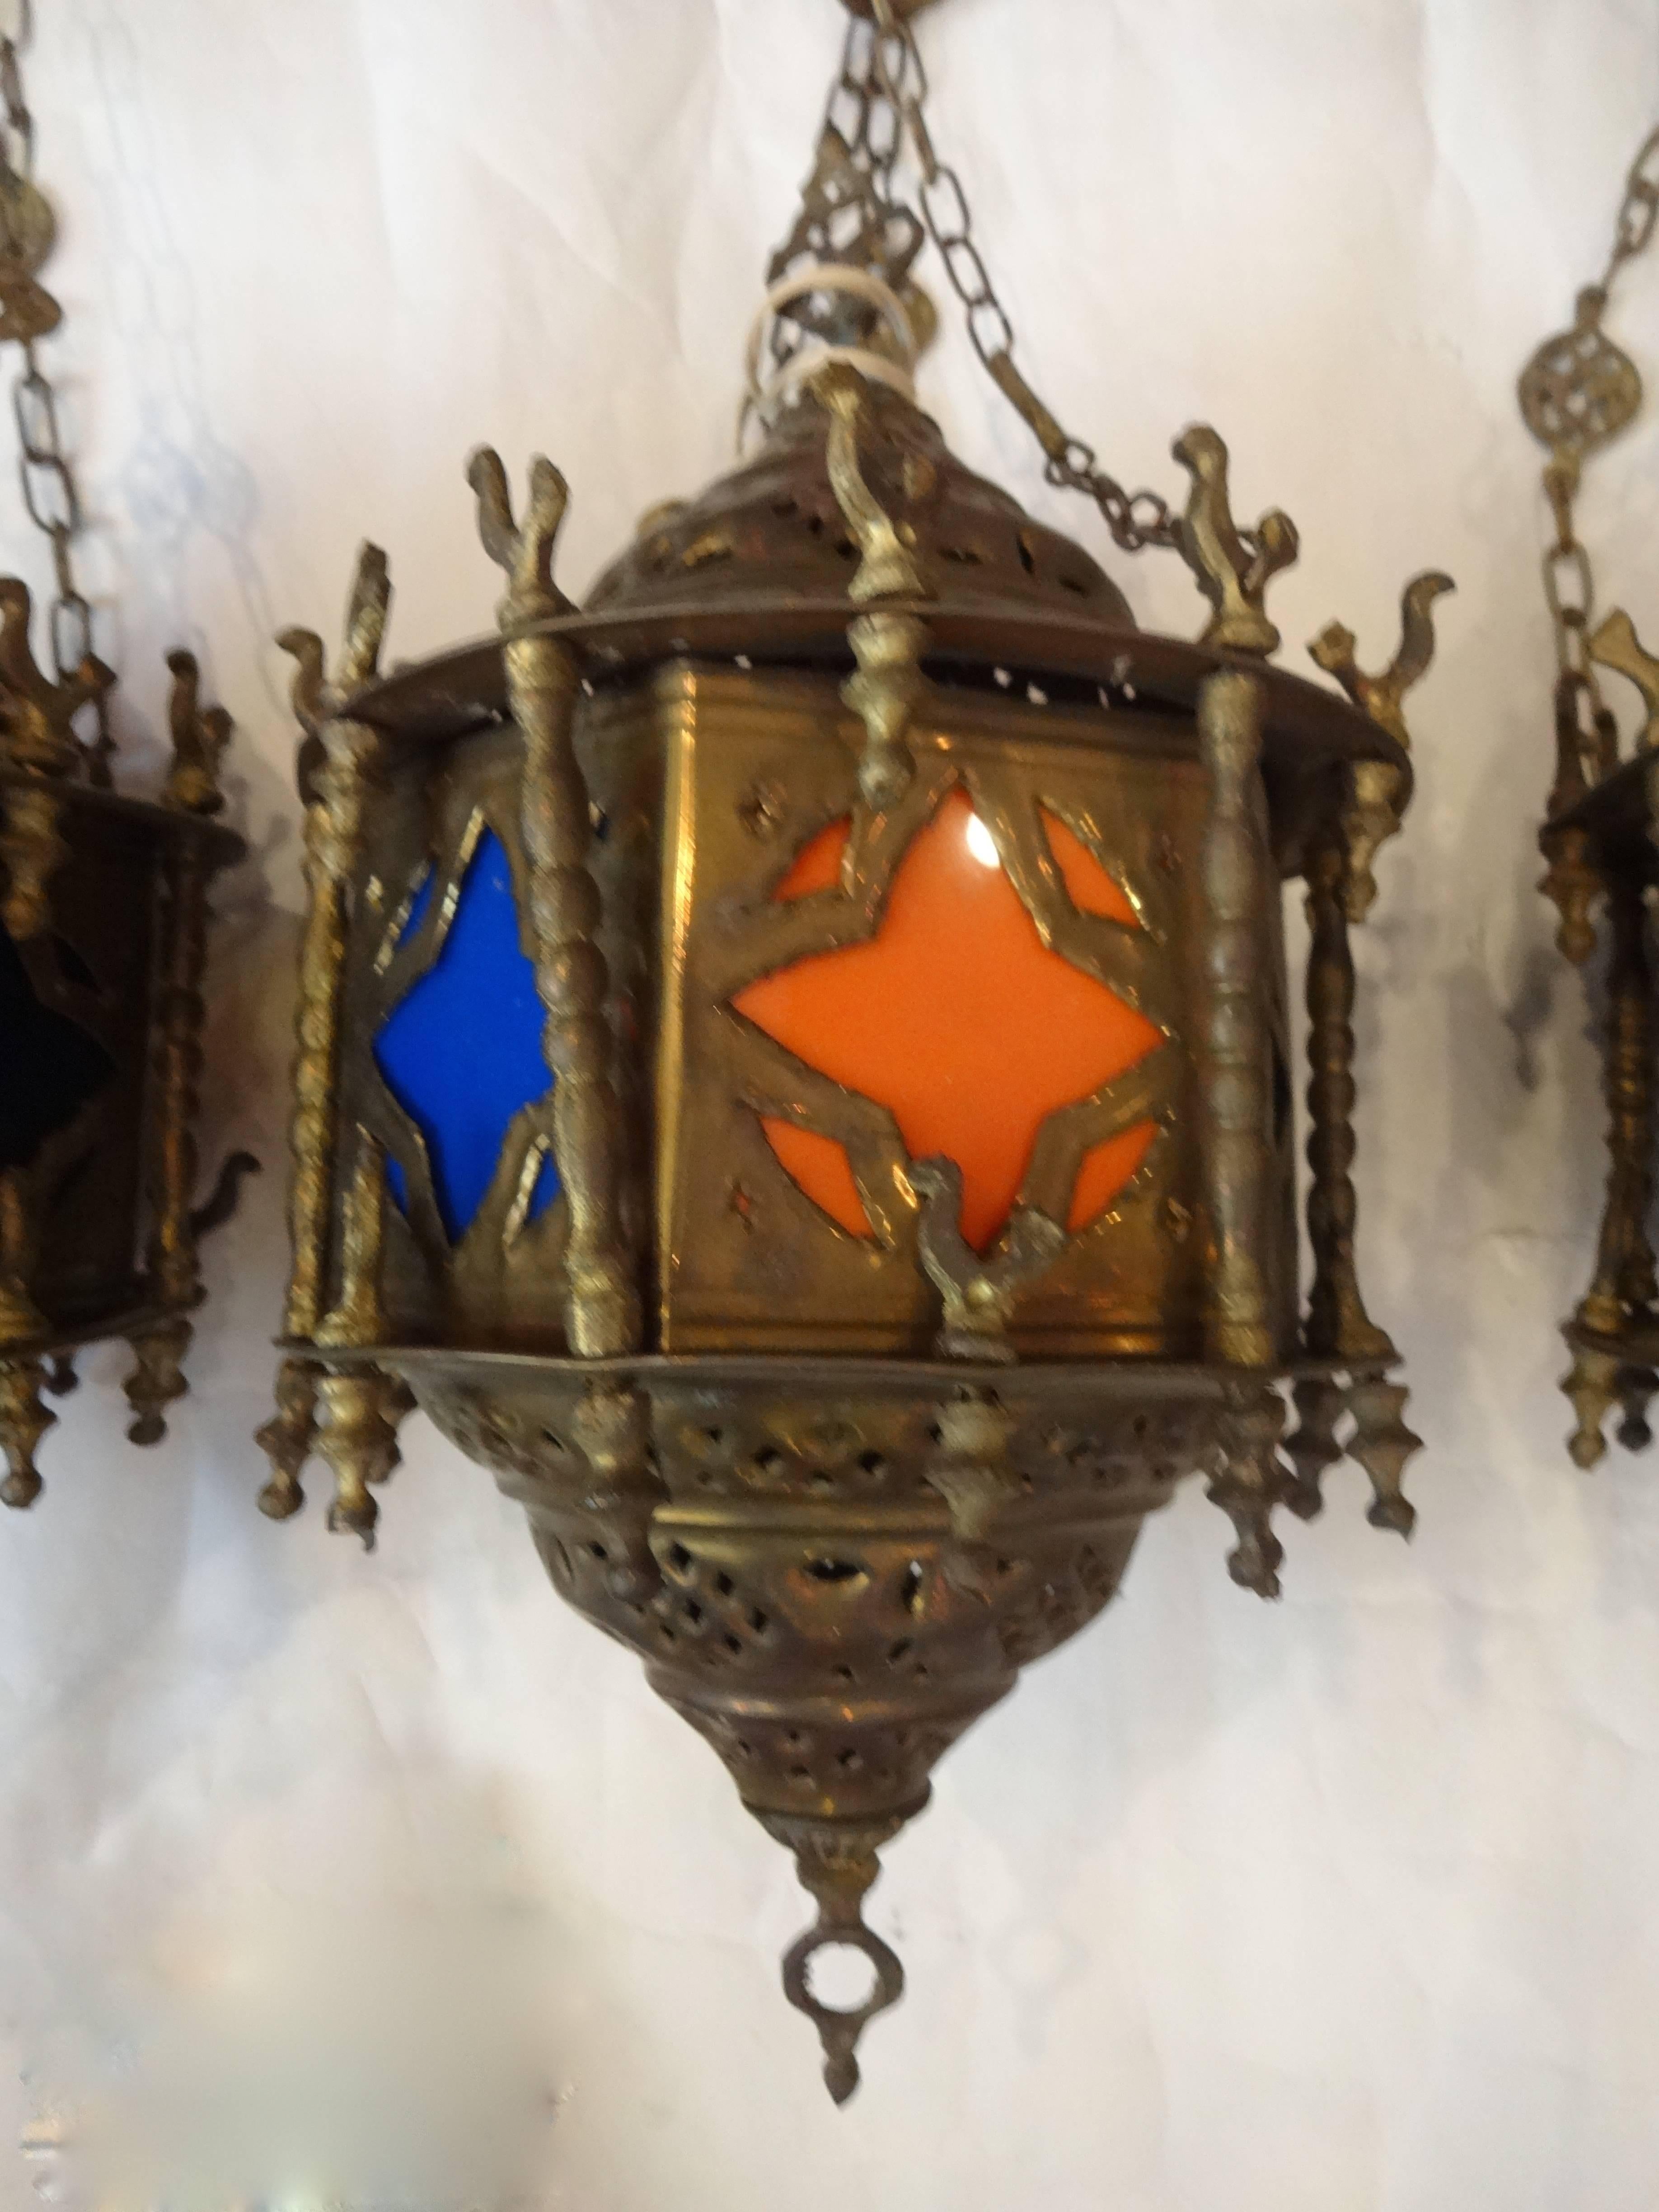 A set of three Moroccan brass and glass hanging lanterns with decorative chains. All three are the same size, slightly different designs. Originally were lit with candles, later electrified. Can be purchased separately ($950.00 each.).